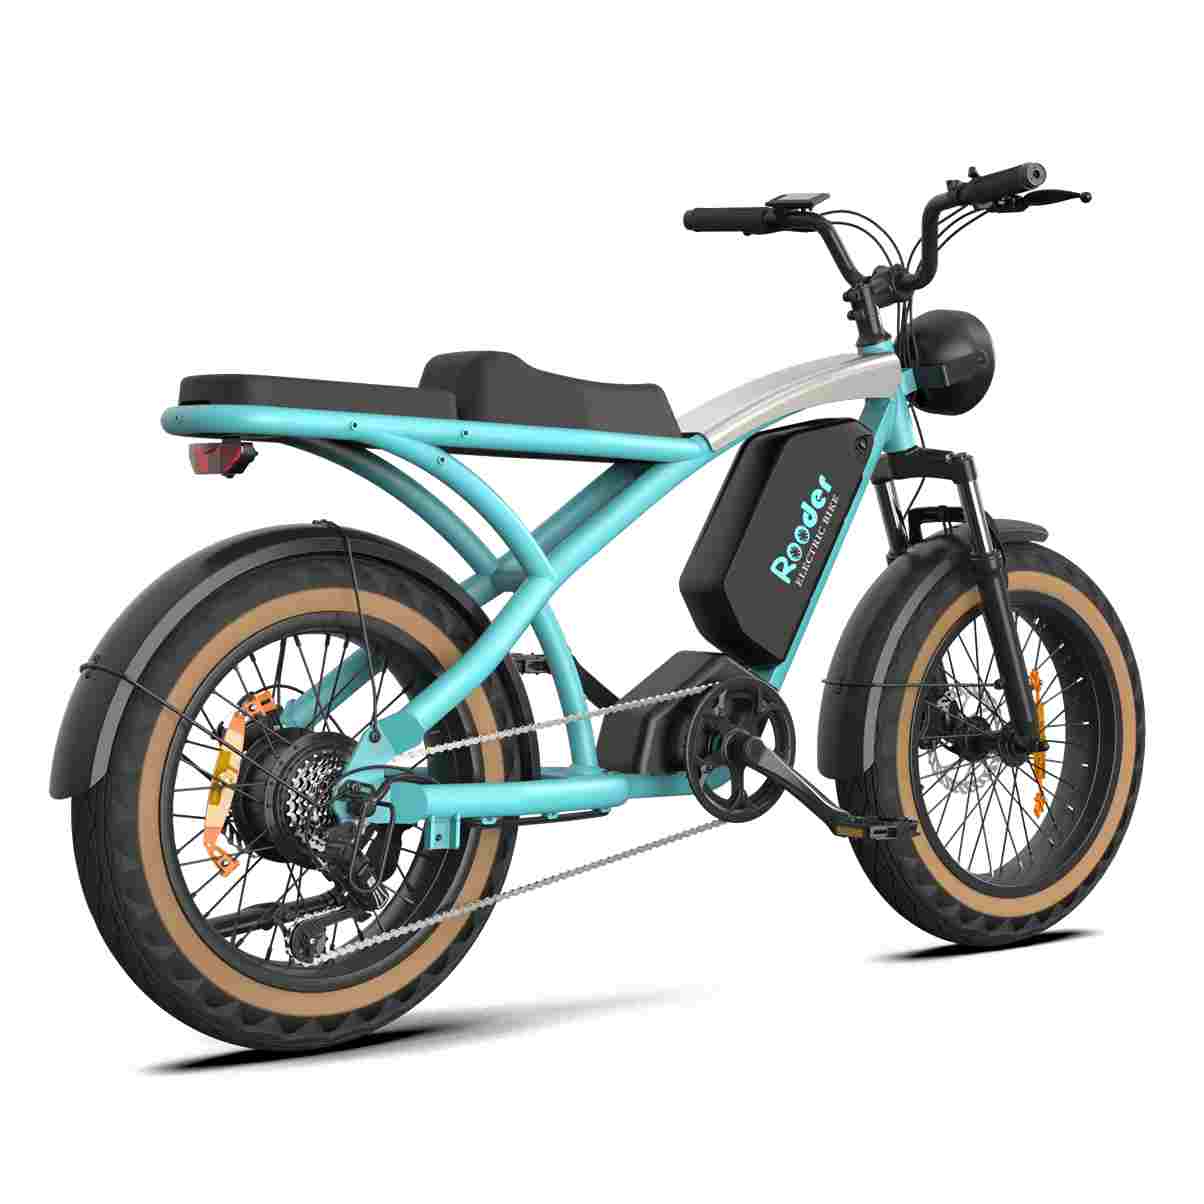 Battery Powered Dirt Bikes For Sale wholesale price